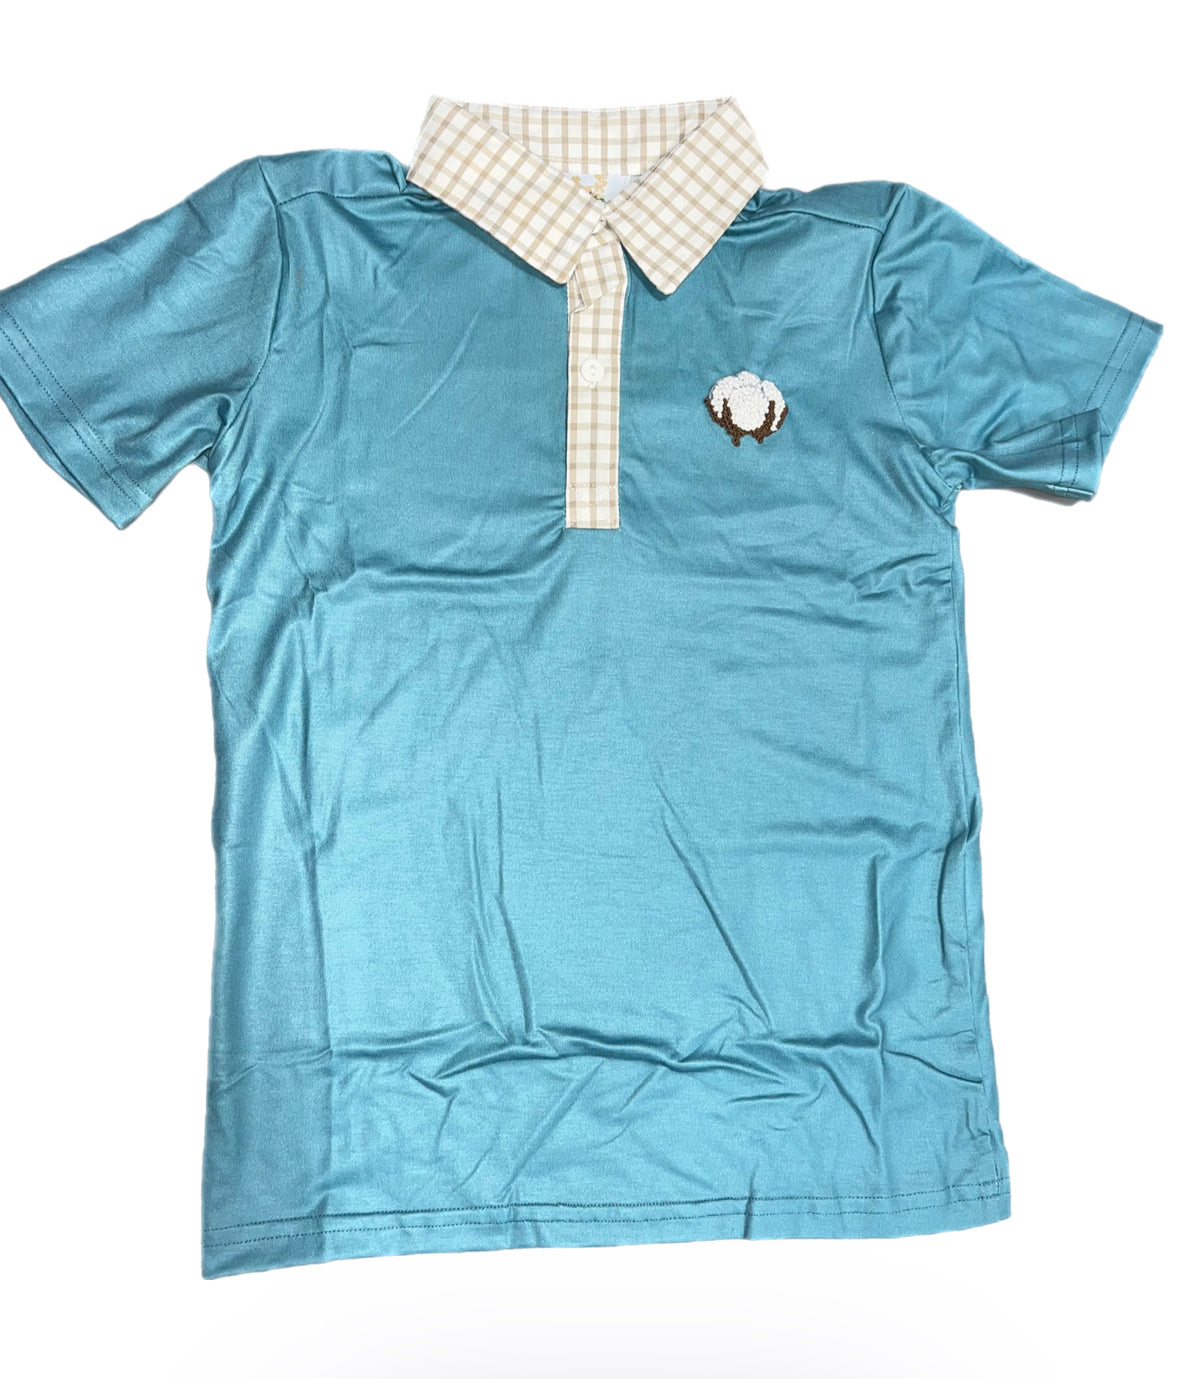 RTS: DEFECT-Boys Teal French Knot Cotton Shirt